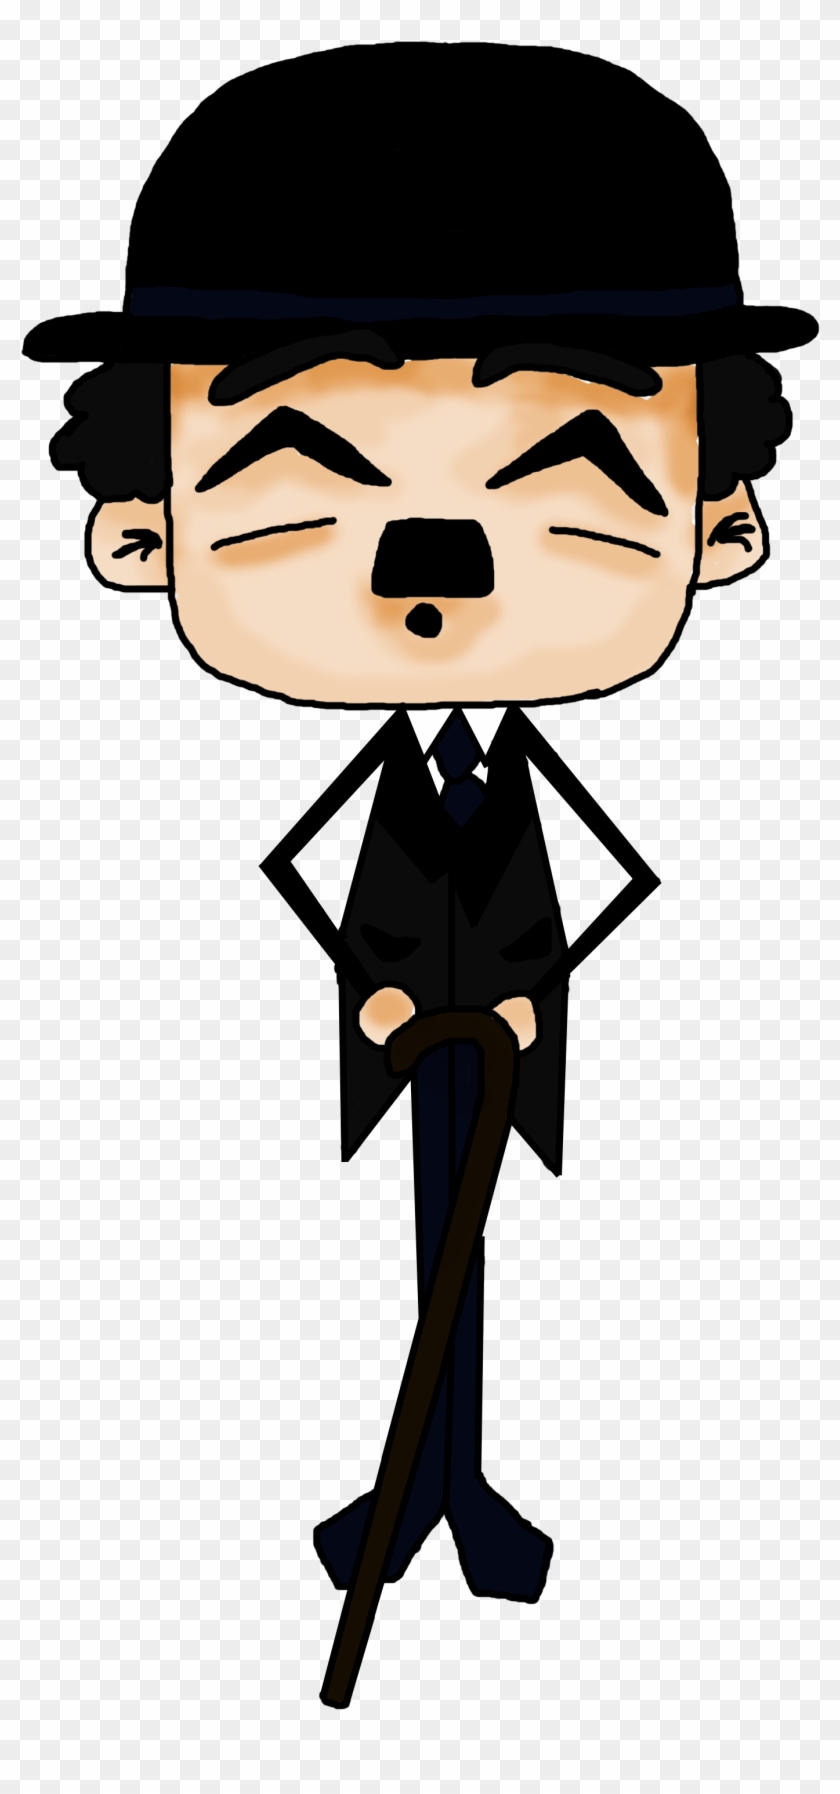 Charlie Chaplin Cartoon Png - Free Transparent PNG Clipart Images Download